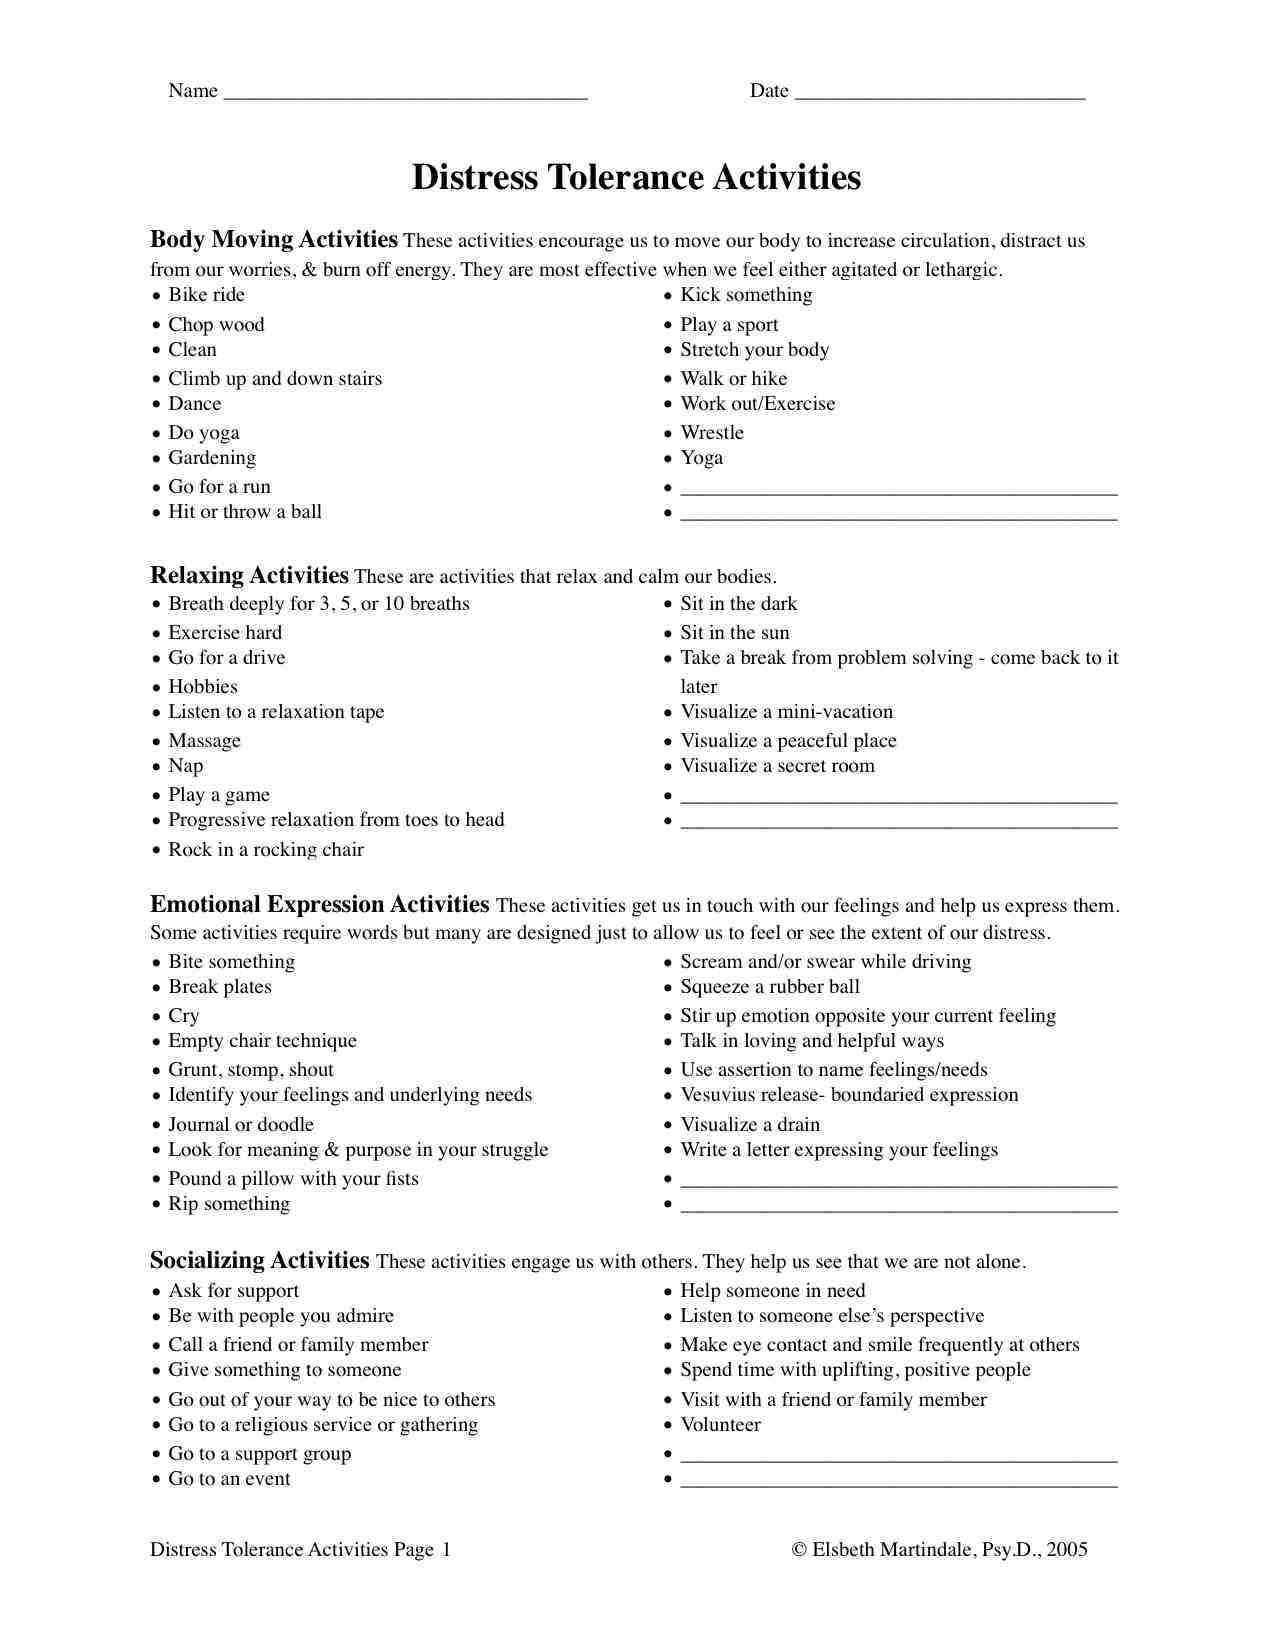 Study Skills Worksheets Pdf as Well as Healing Schemas Anxiety Pinterest